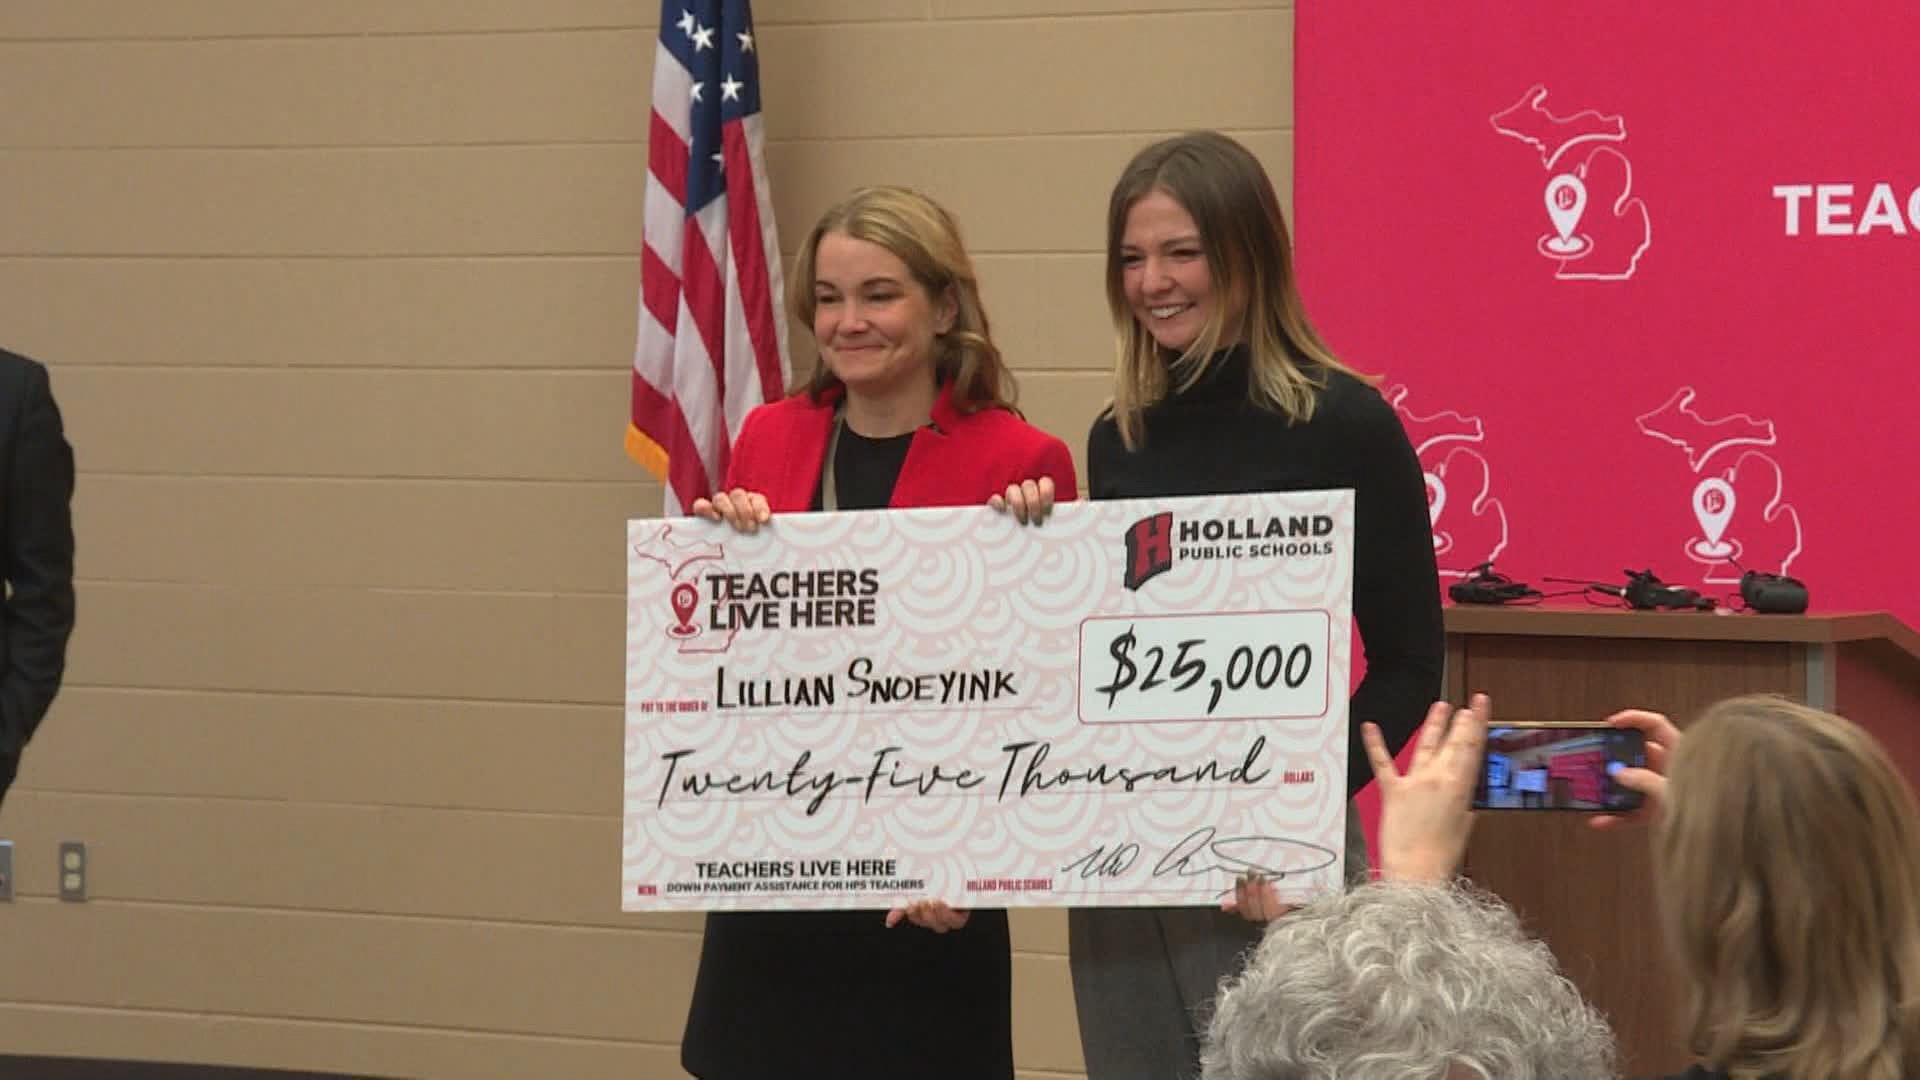 Holland Public Schools announced a brand new program aimed at attracting and retaining teachers in the district on Tuesday.